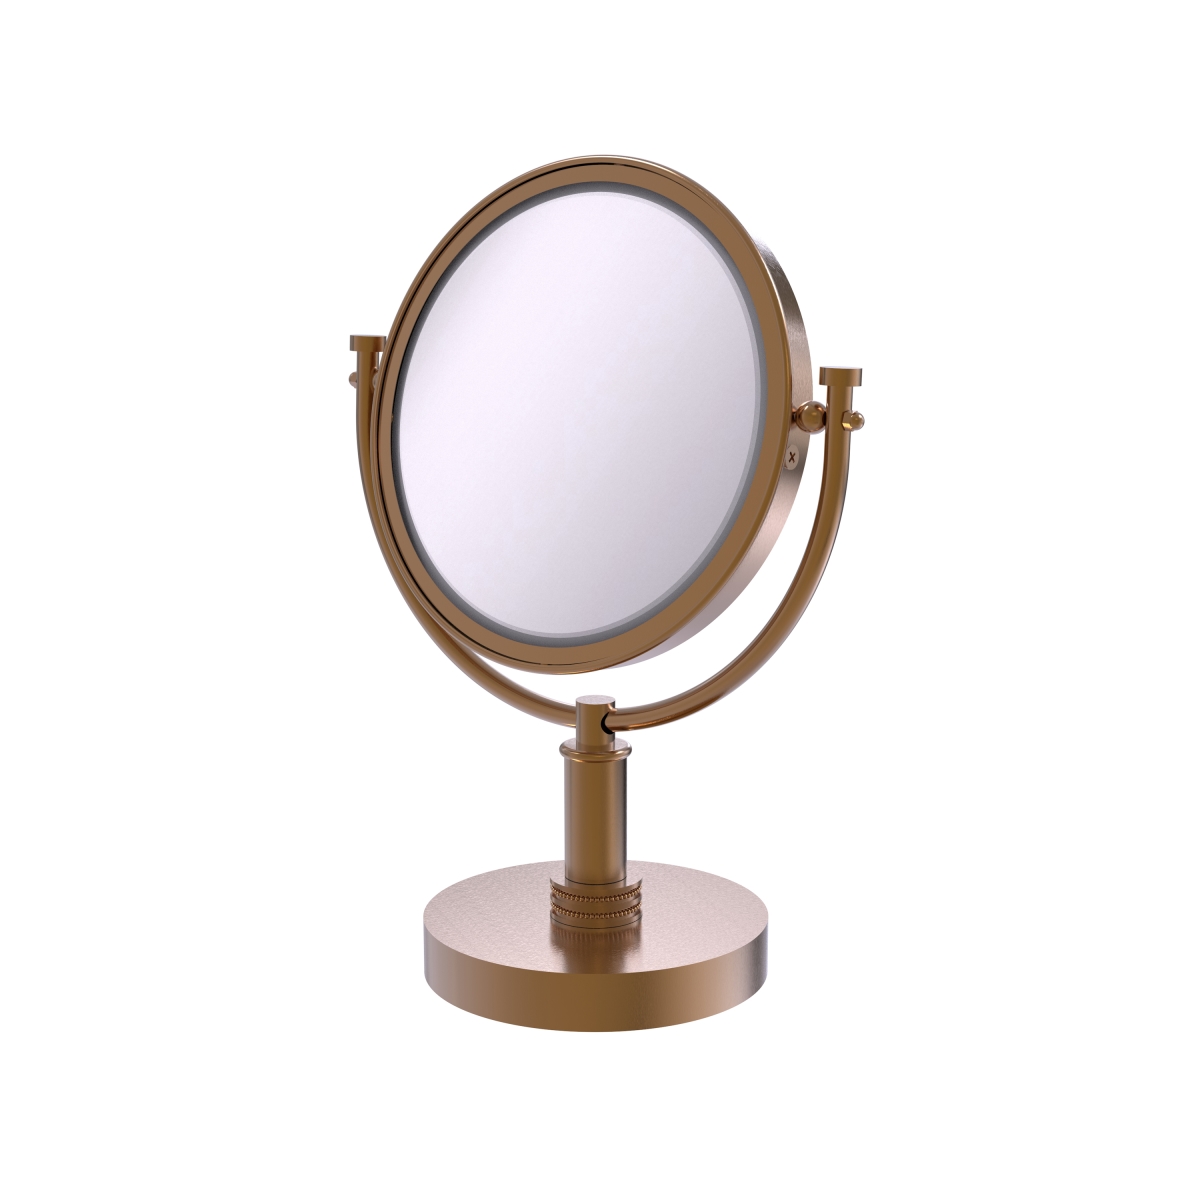 Dm-4d-5x-bbr Dotted Ring Style 8 In. Vanity Top Make-up Mirror 5x Magnification, Brushed Bronze